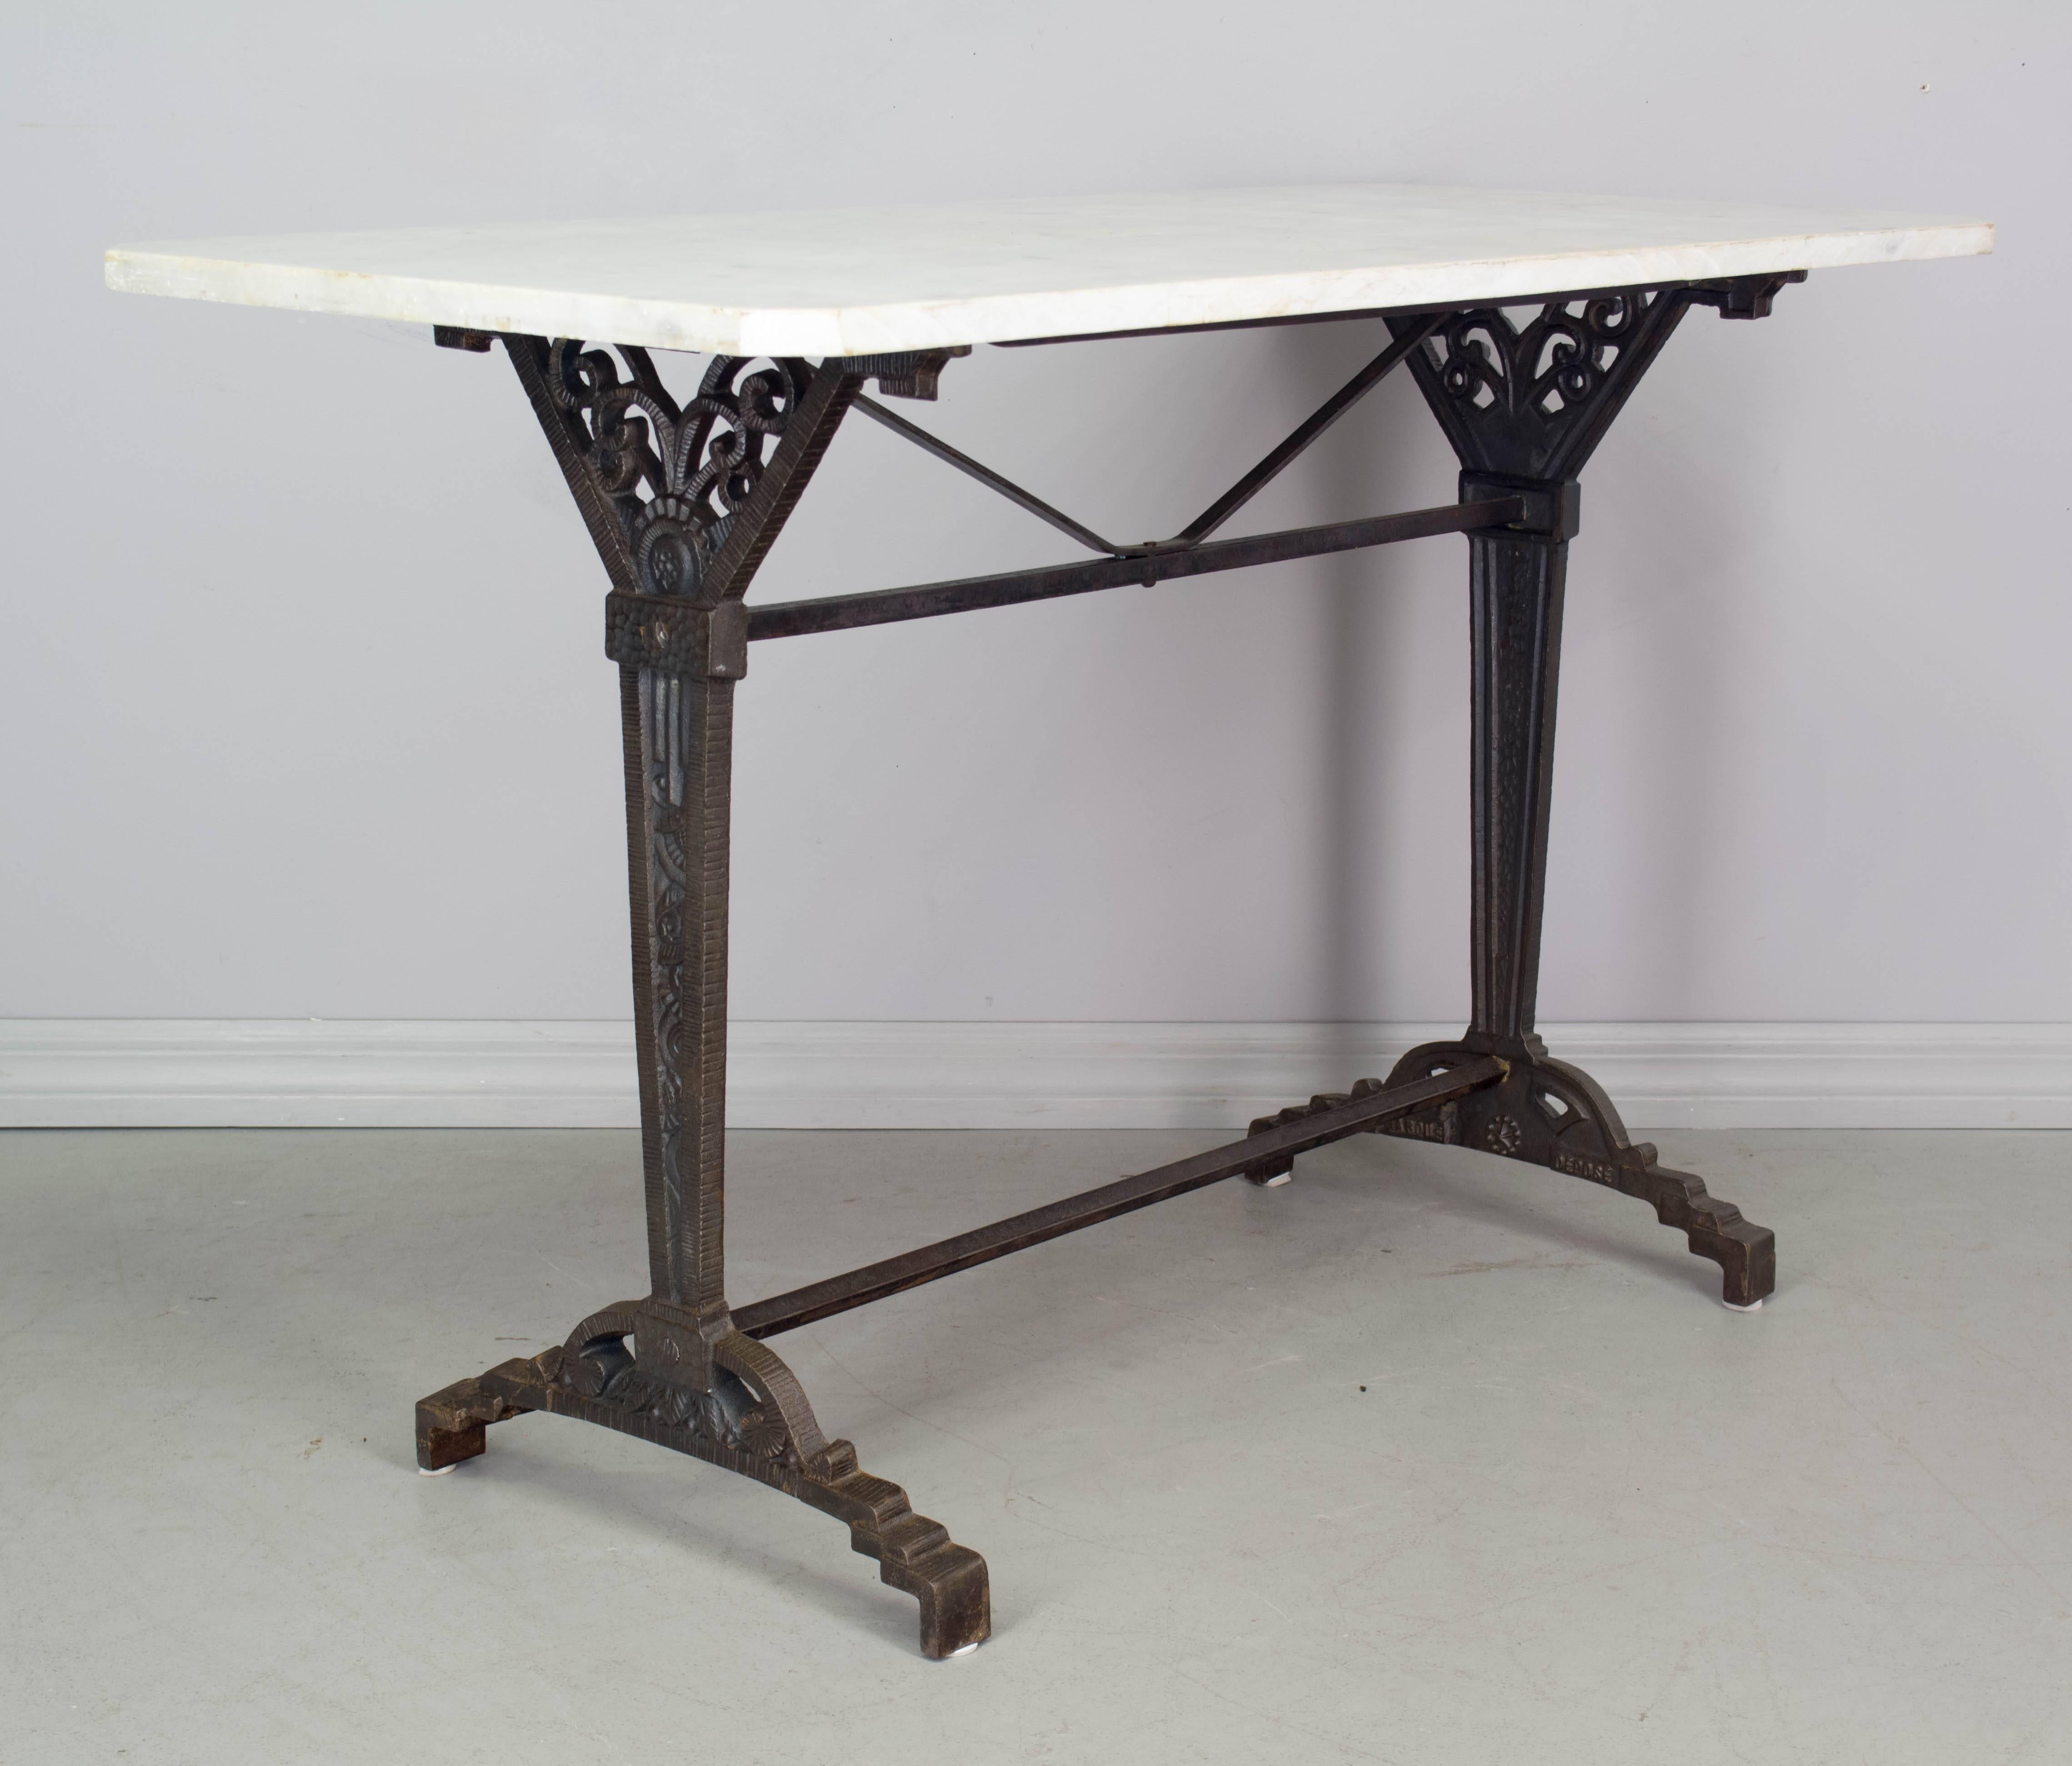 French Art Deco cast iron bistro table. Marble-top is not original, but as found with the base. Base is stamped: Marque Deposé (Patented).